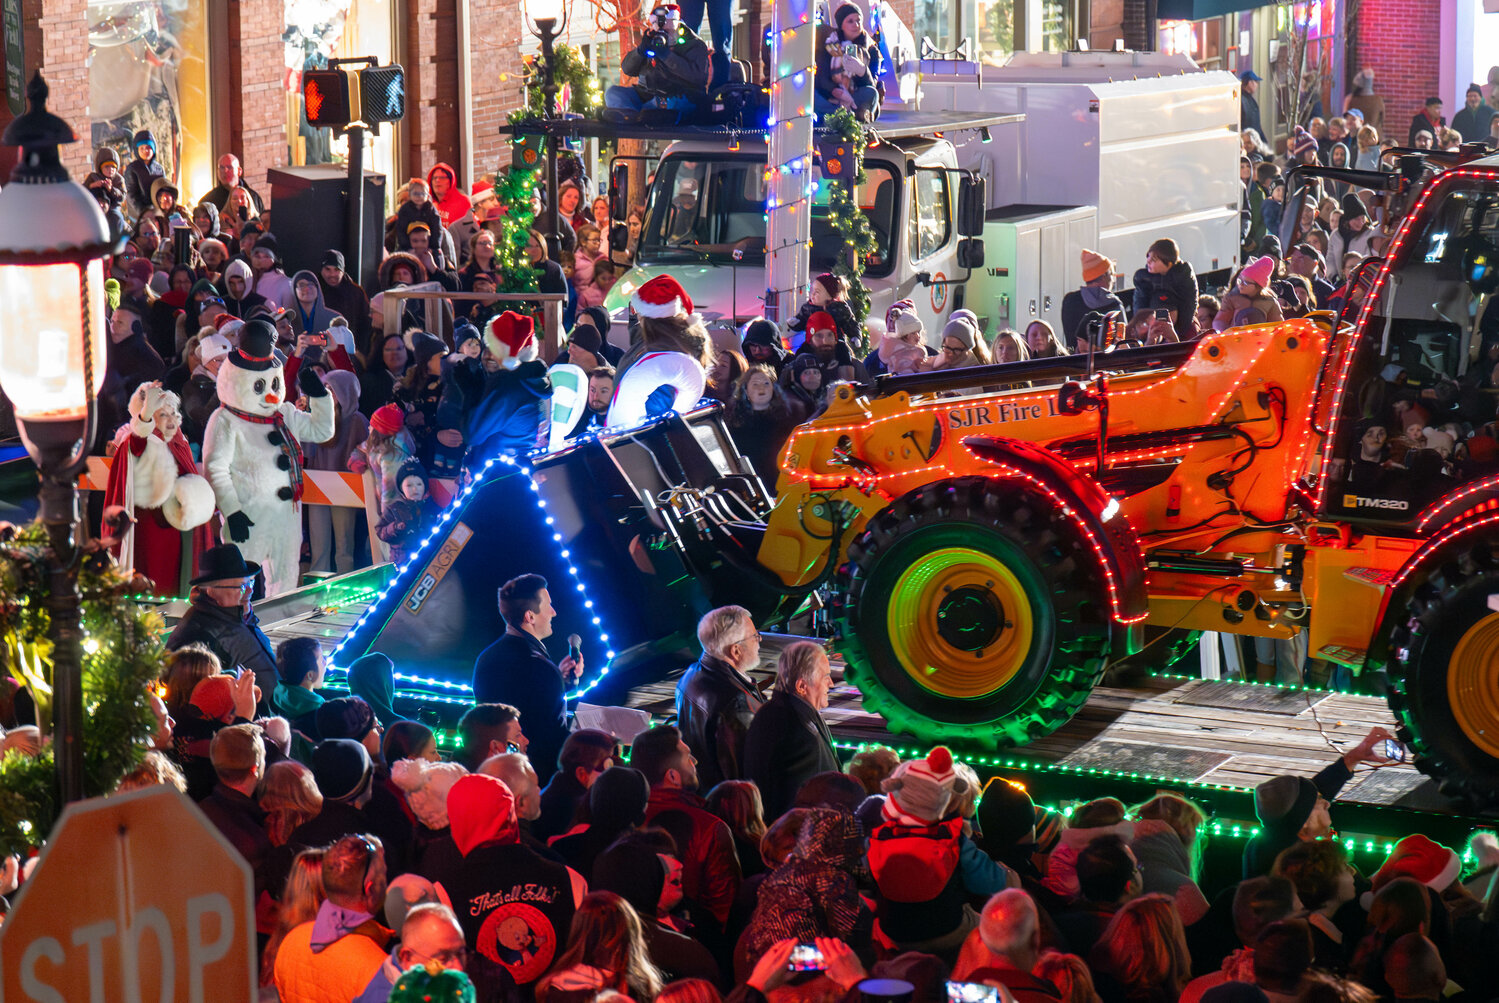 A decorated SJR Fire LLC wheel loader takes part in Friday night’s holiday parade in Doylestown Borough.